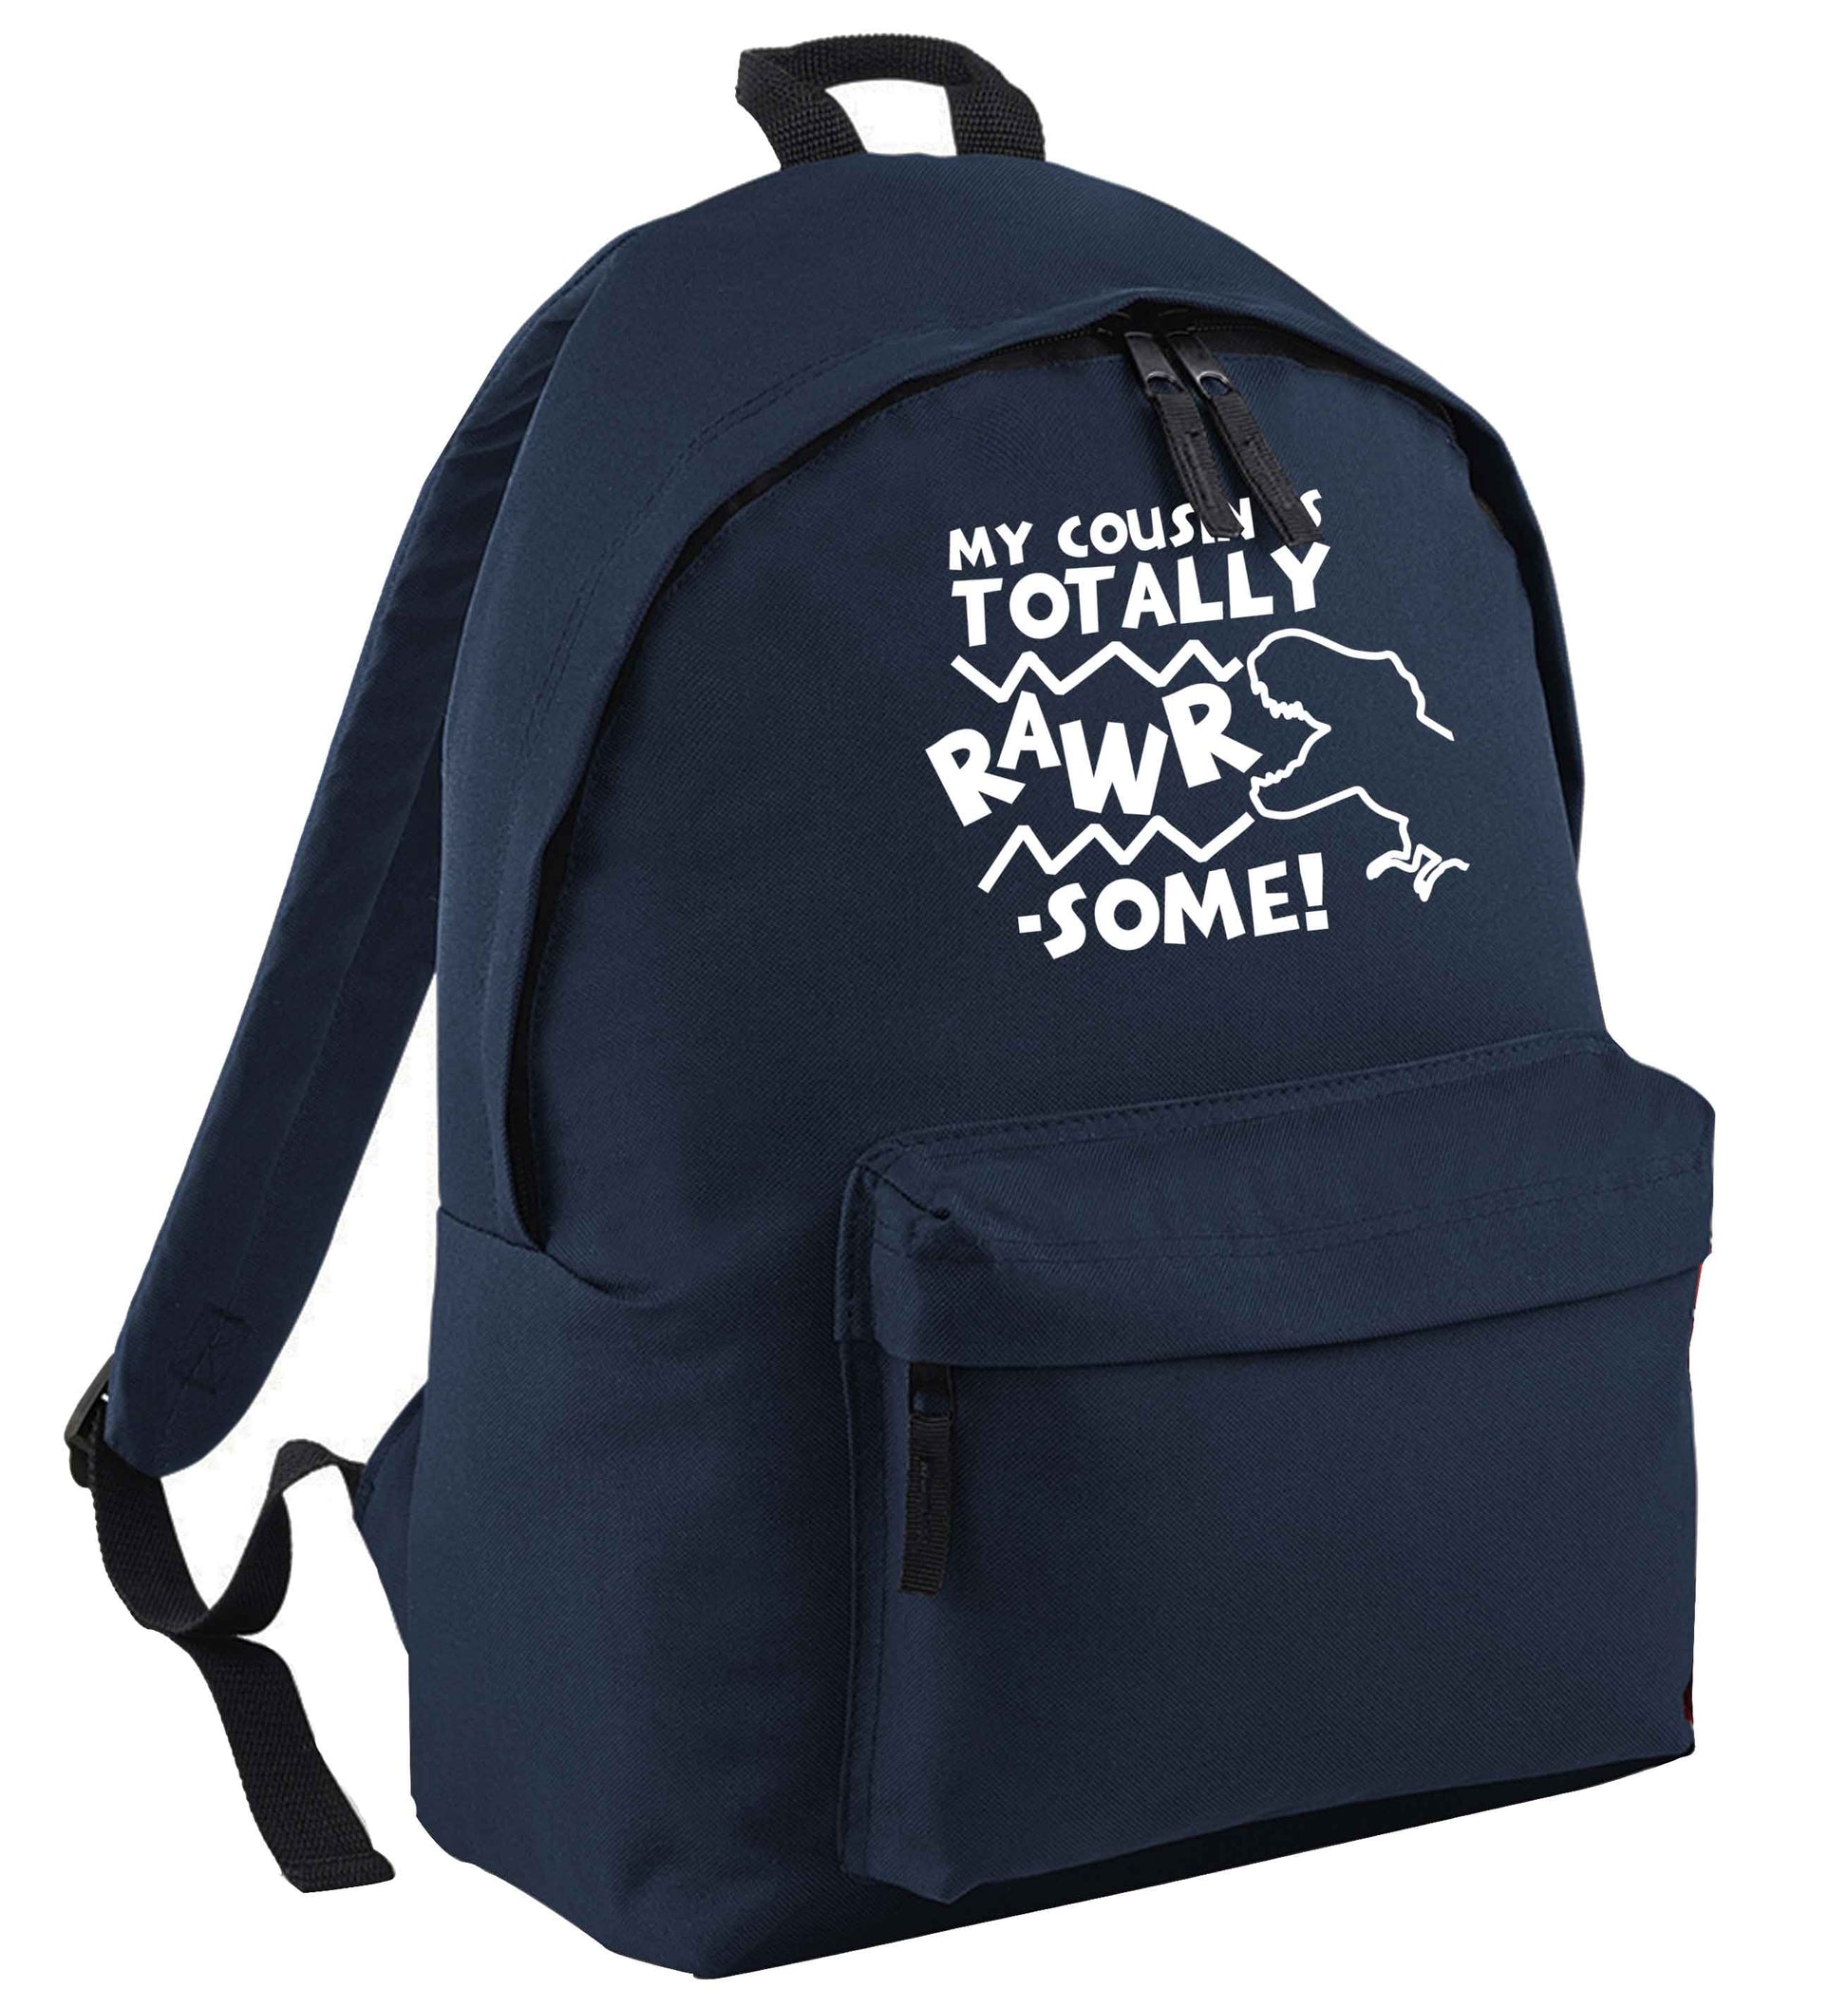 My cousin is totally rawrsome navy childrens backpack